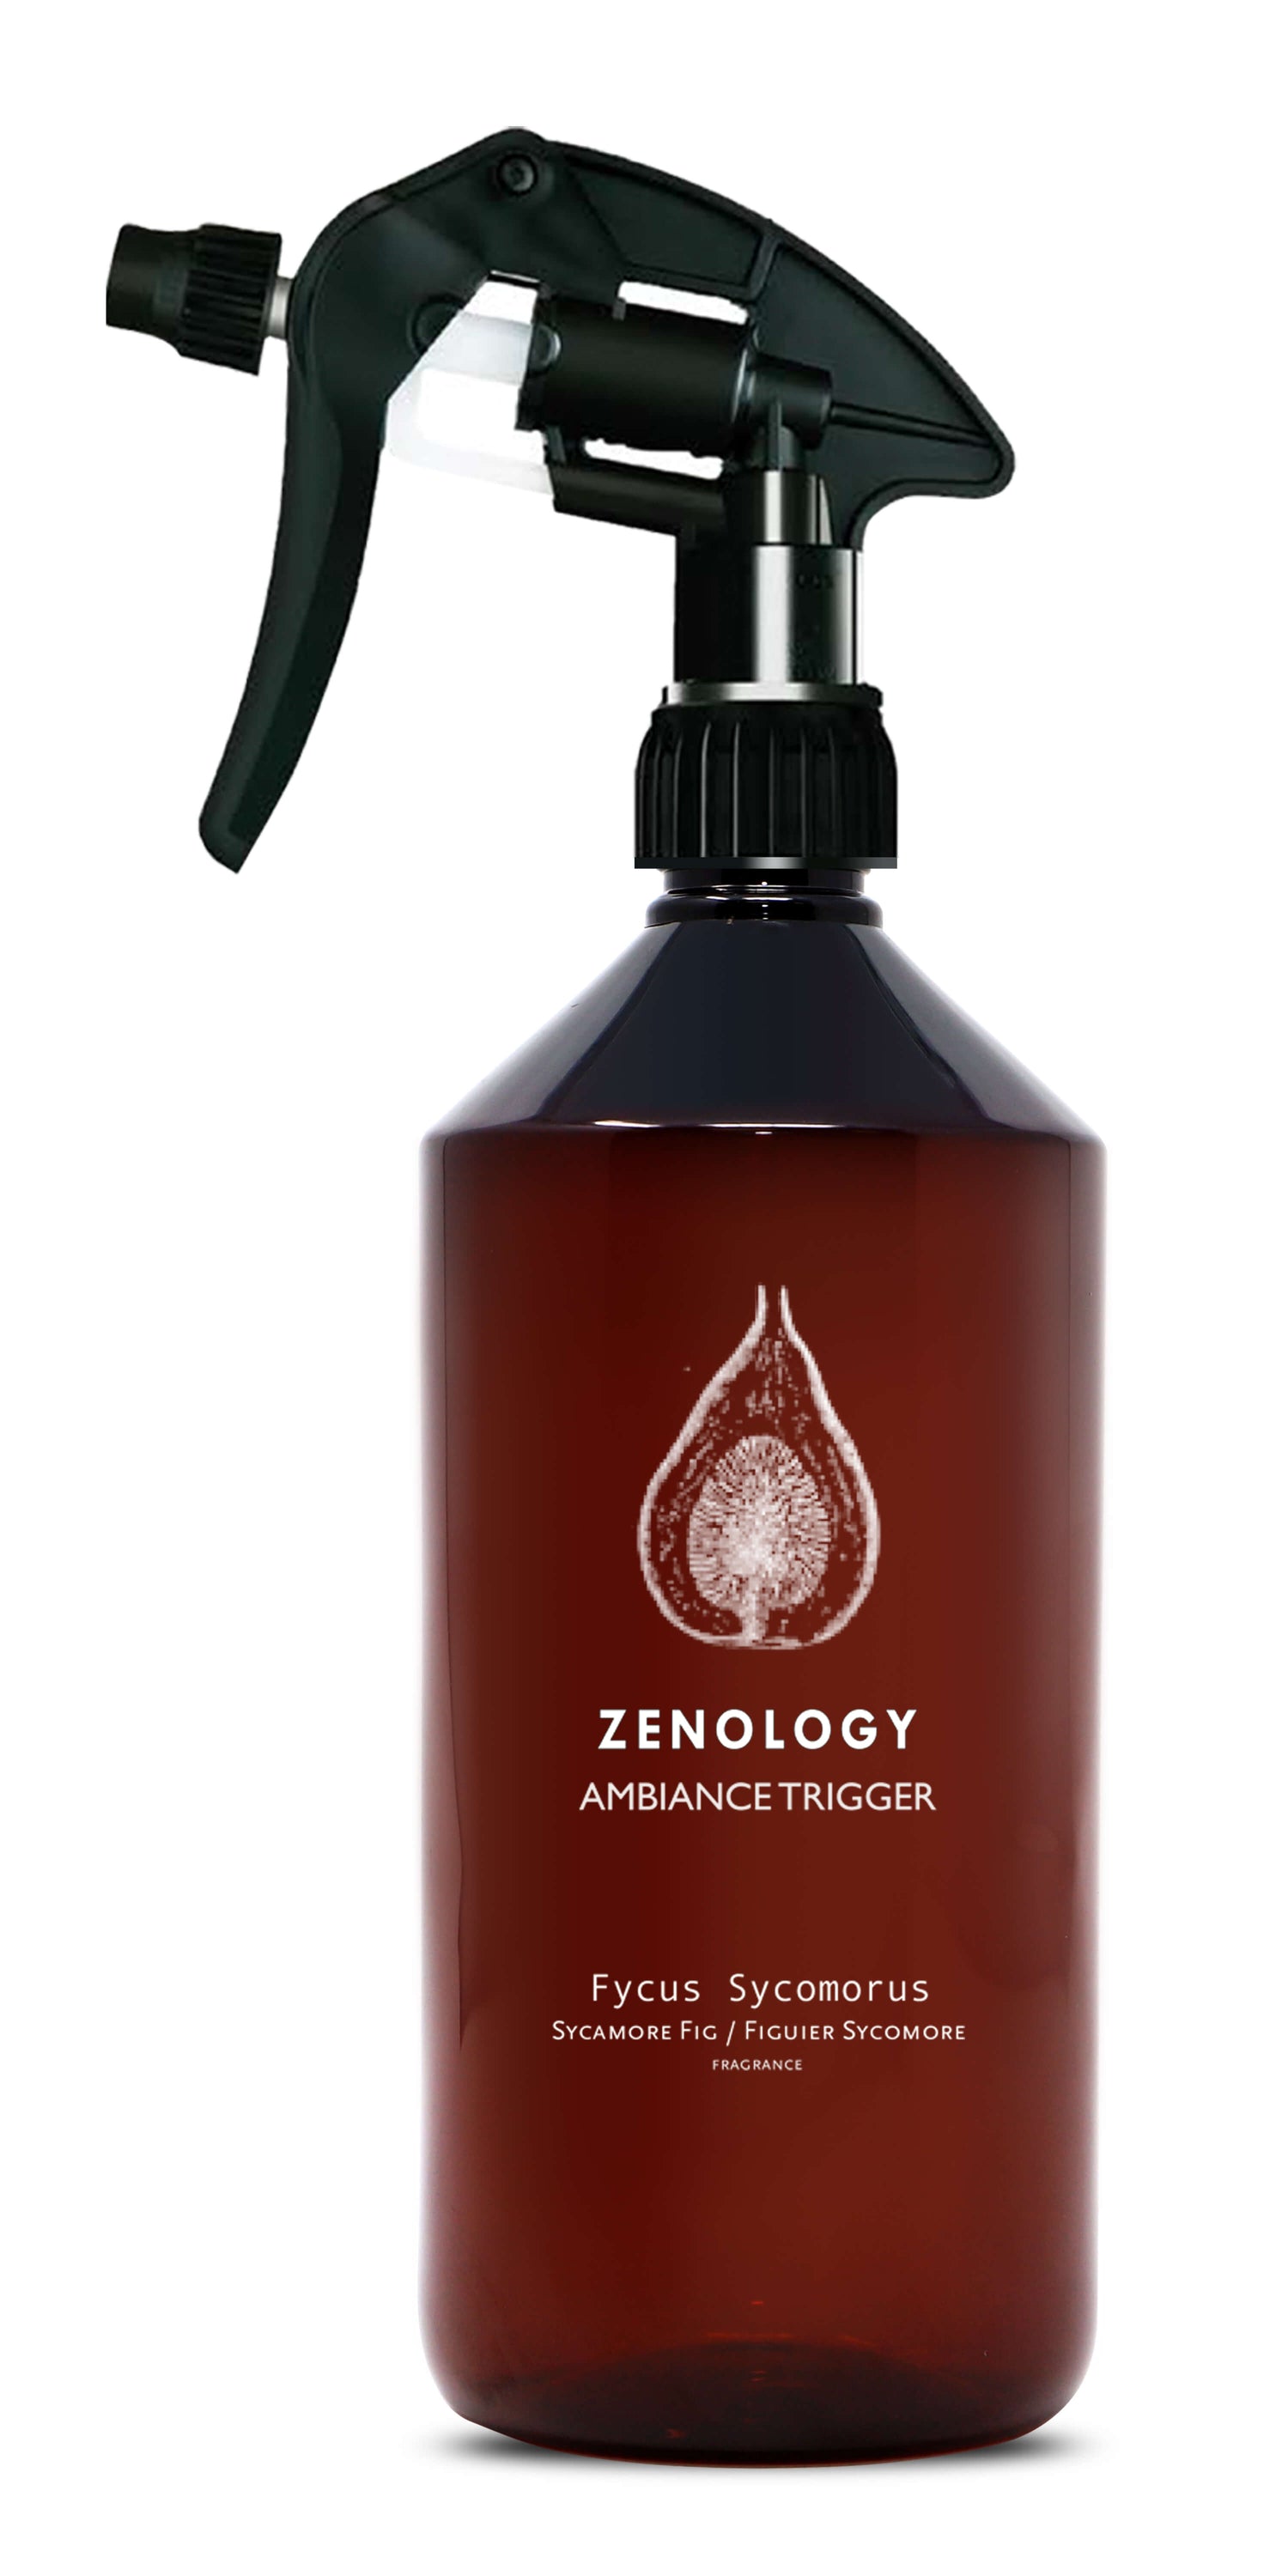 ZENOLOGY AMBIANCE TRIGGER FYCUS SYCOMORUS SYCAMORE FIG FRAGRANCE 1000 ML